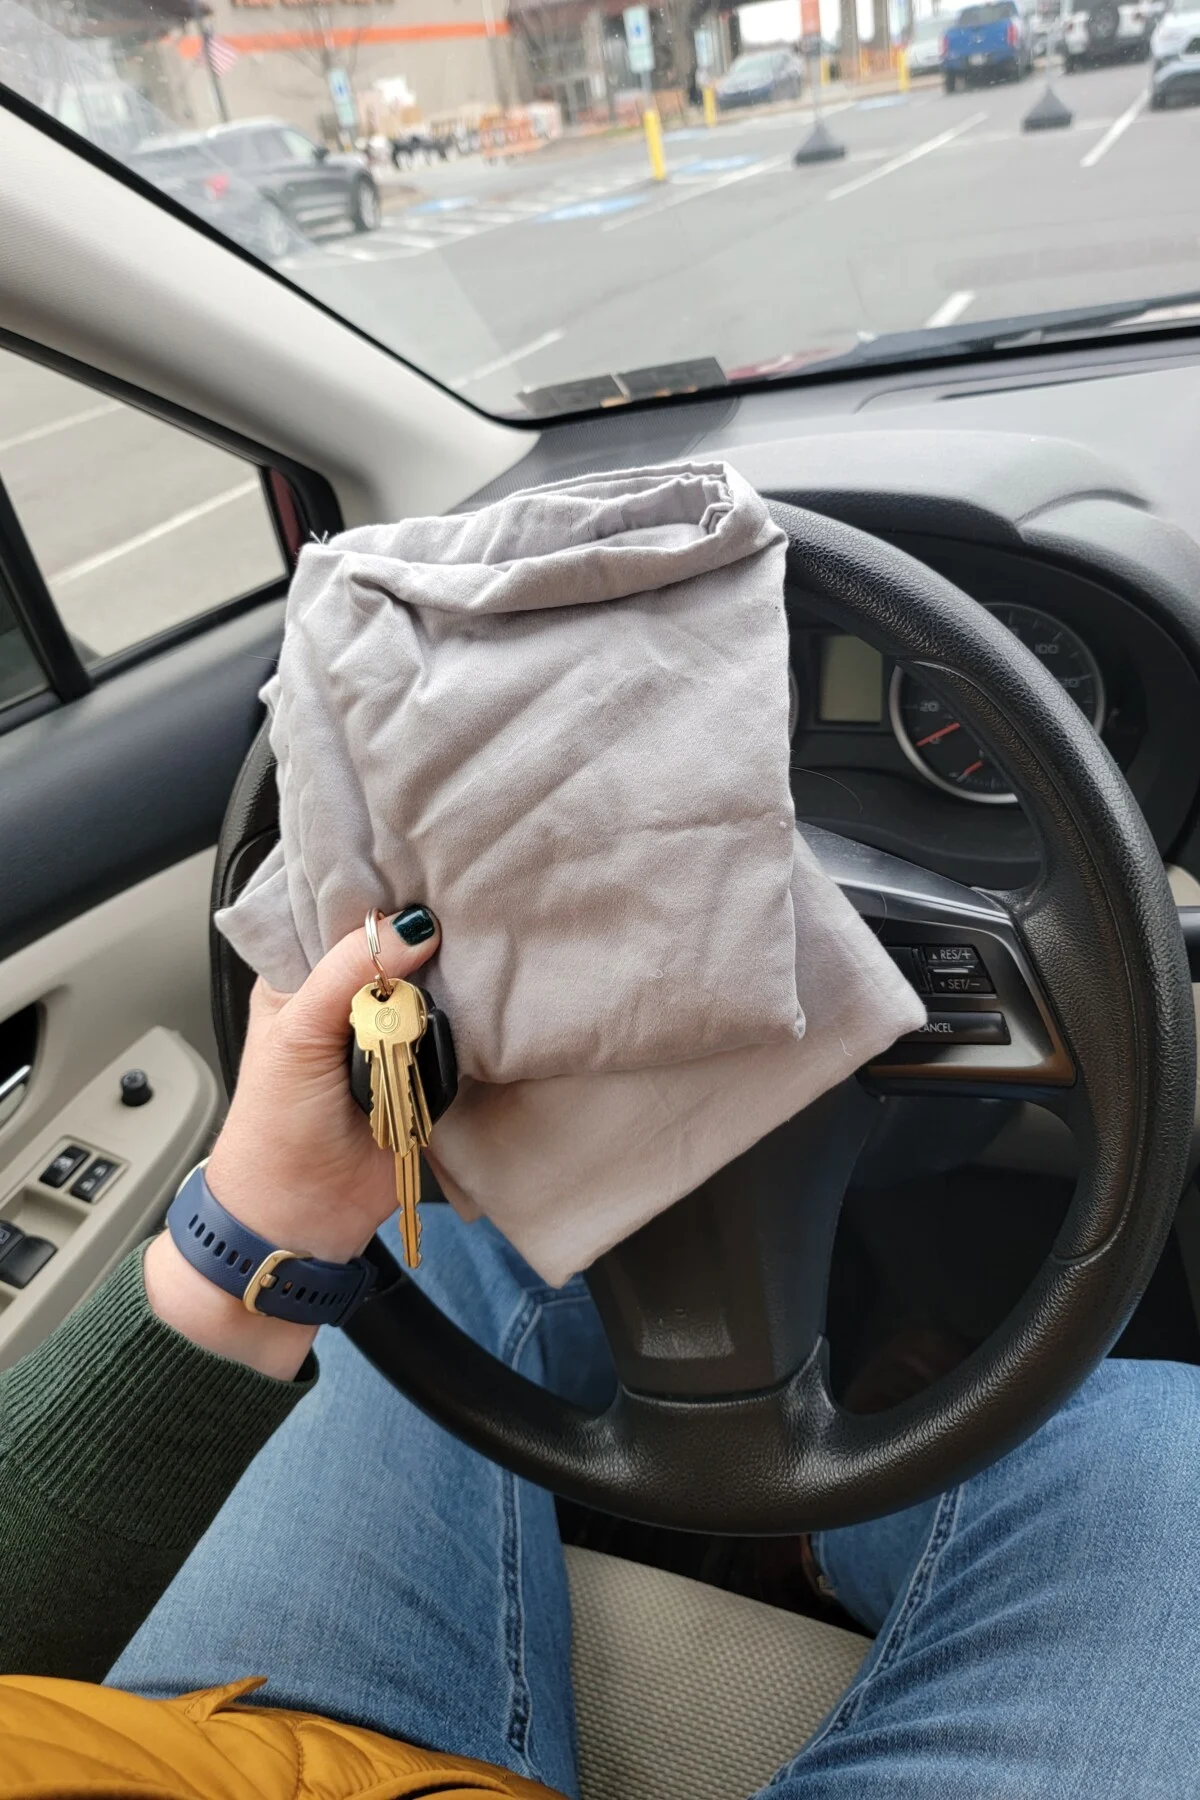 Woman's hand holding car keys and pillowcases